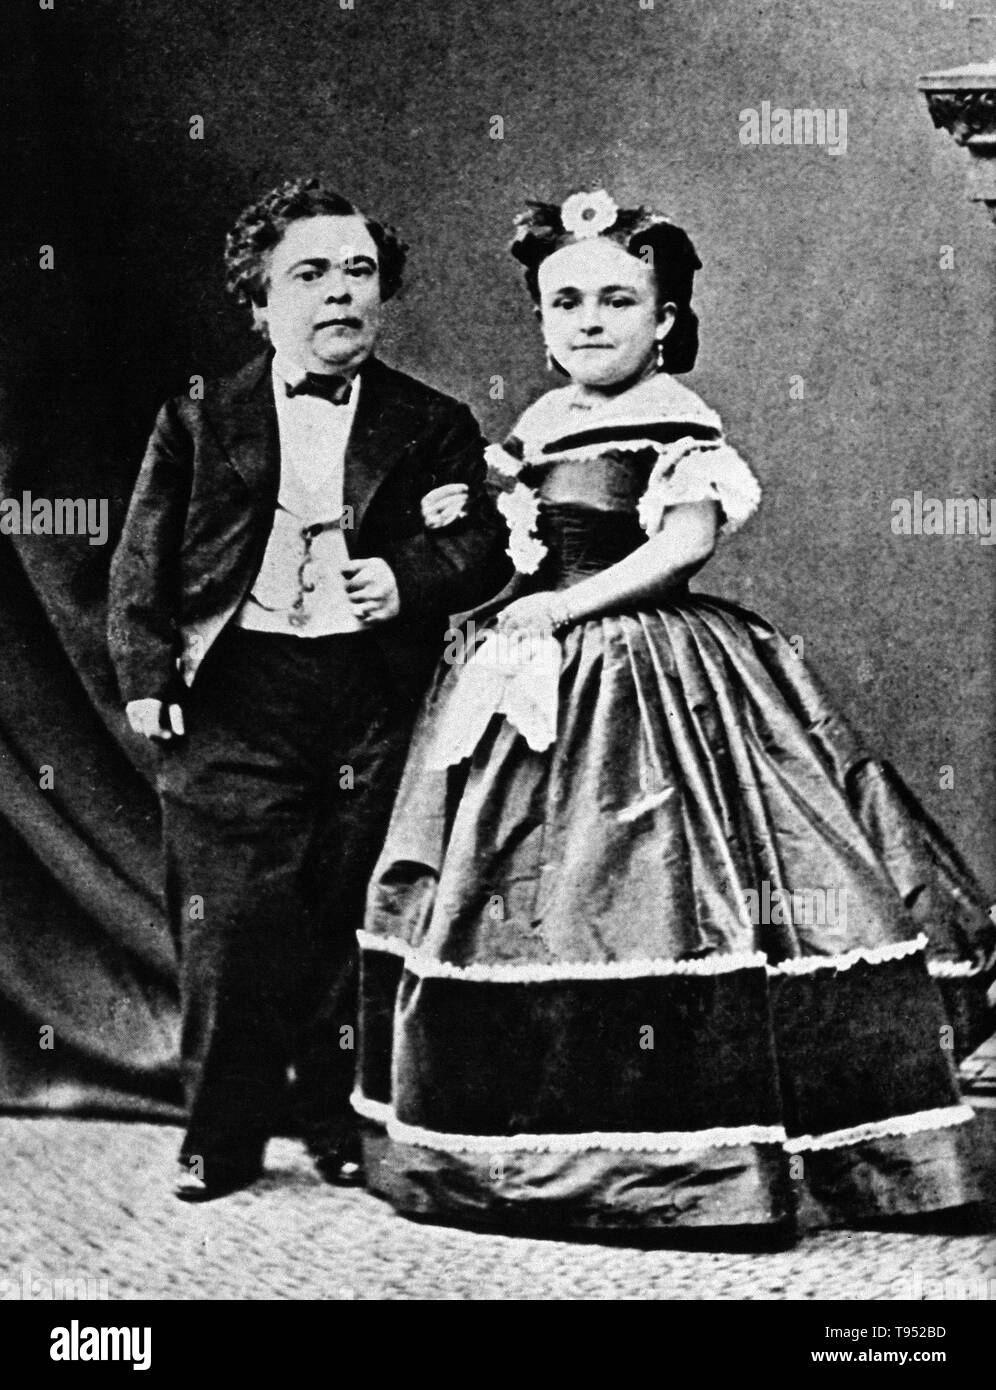 Charles Sherwood Stratton (January 4, 1838 - July 15, 1883), 'General Tom Thumb', was an American dwarf performer. P.T. Barnum, a distant relative (half fifth cousin, twice removed), heard about Stratton and after contacting his parents, taught the boy how to sing, dance, mime, and impersonate famous people. Barnum took young Stratton on a tour of Europe, making him an international celebrity. Stock Photo